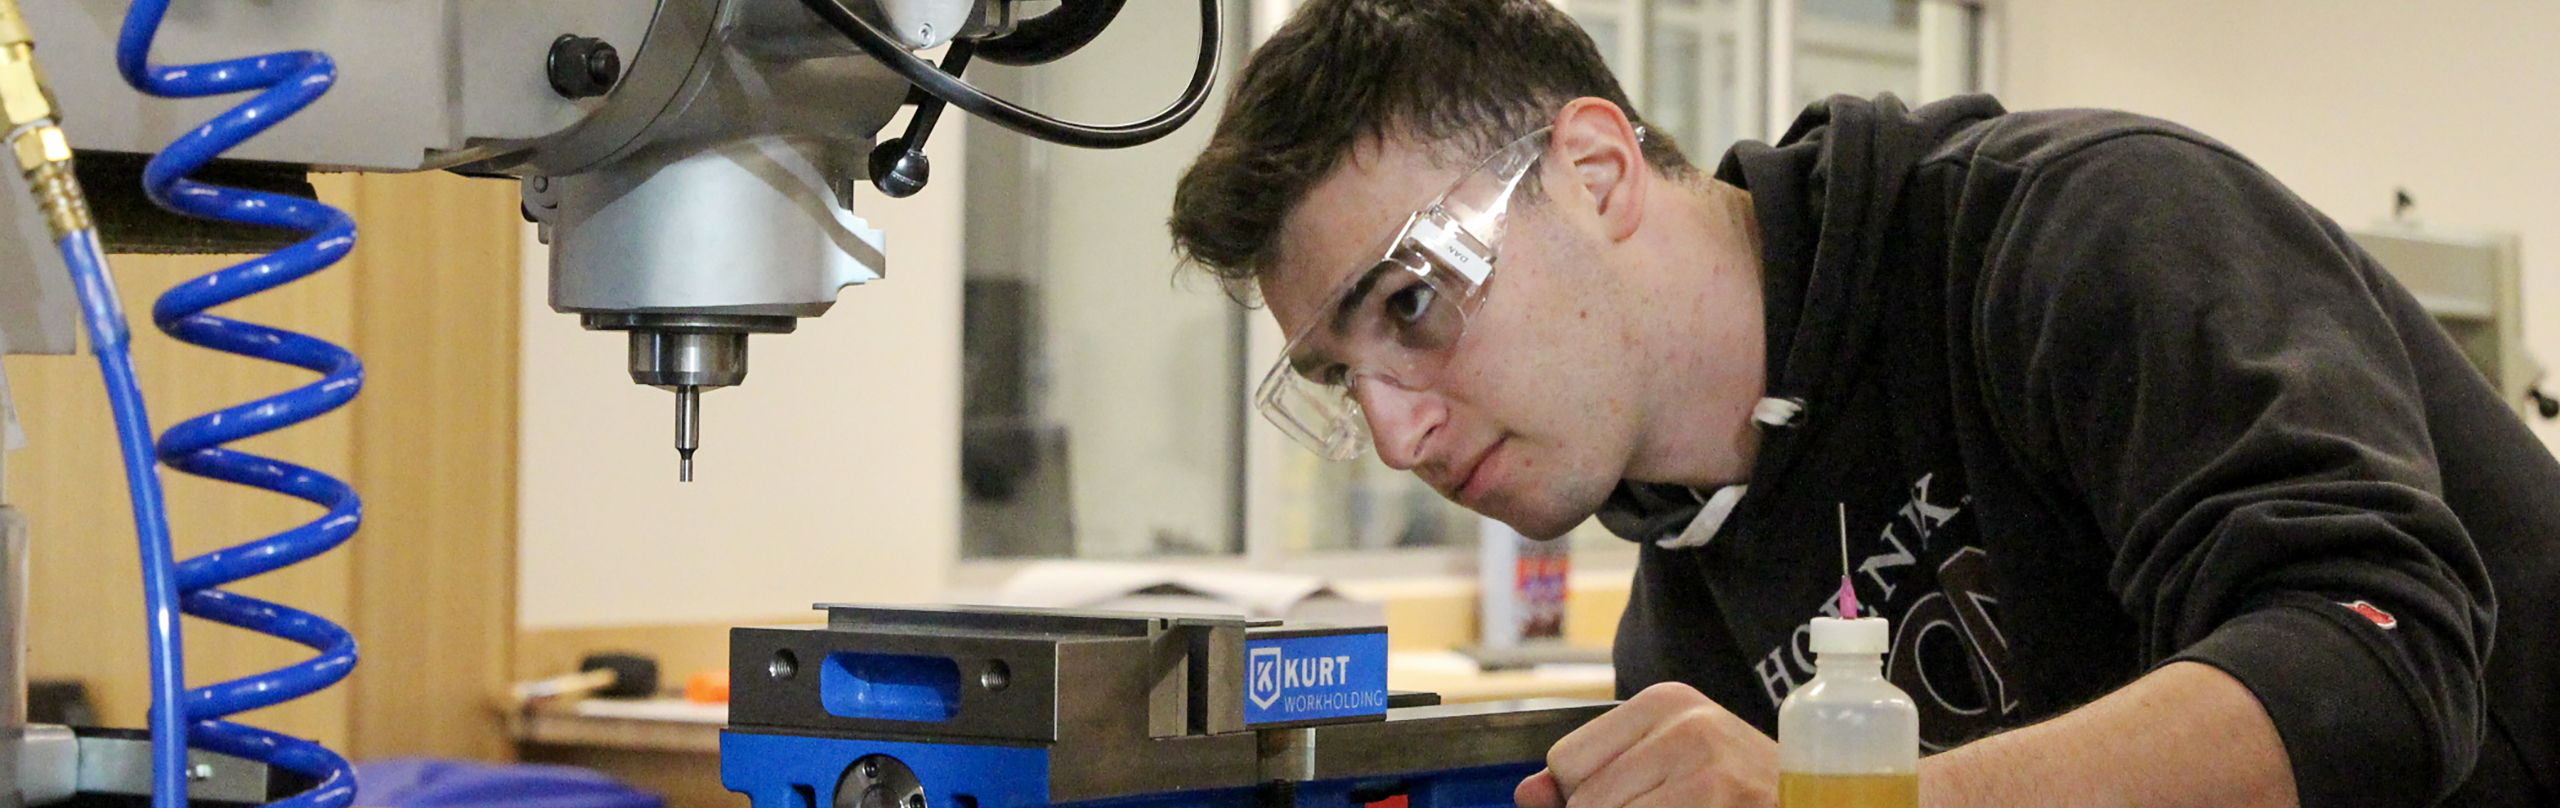 A student works with machinery in the Clark Prototype Lab. Explore engineering schools nc for your engineers degree